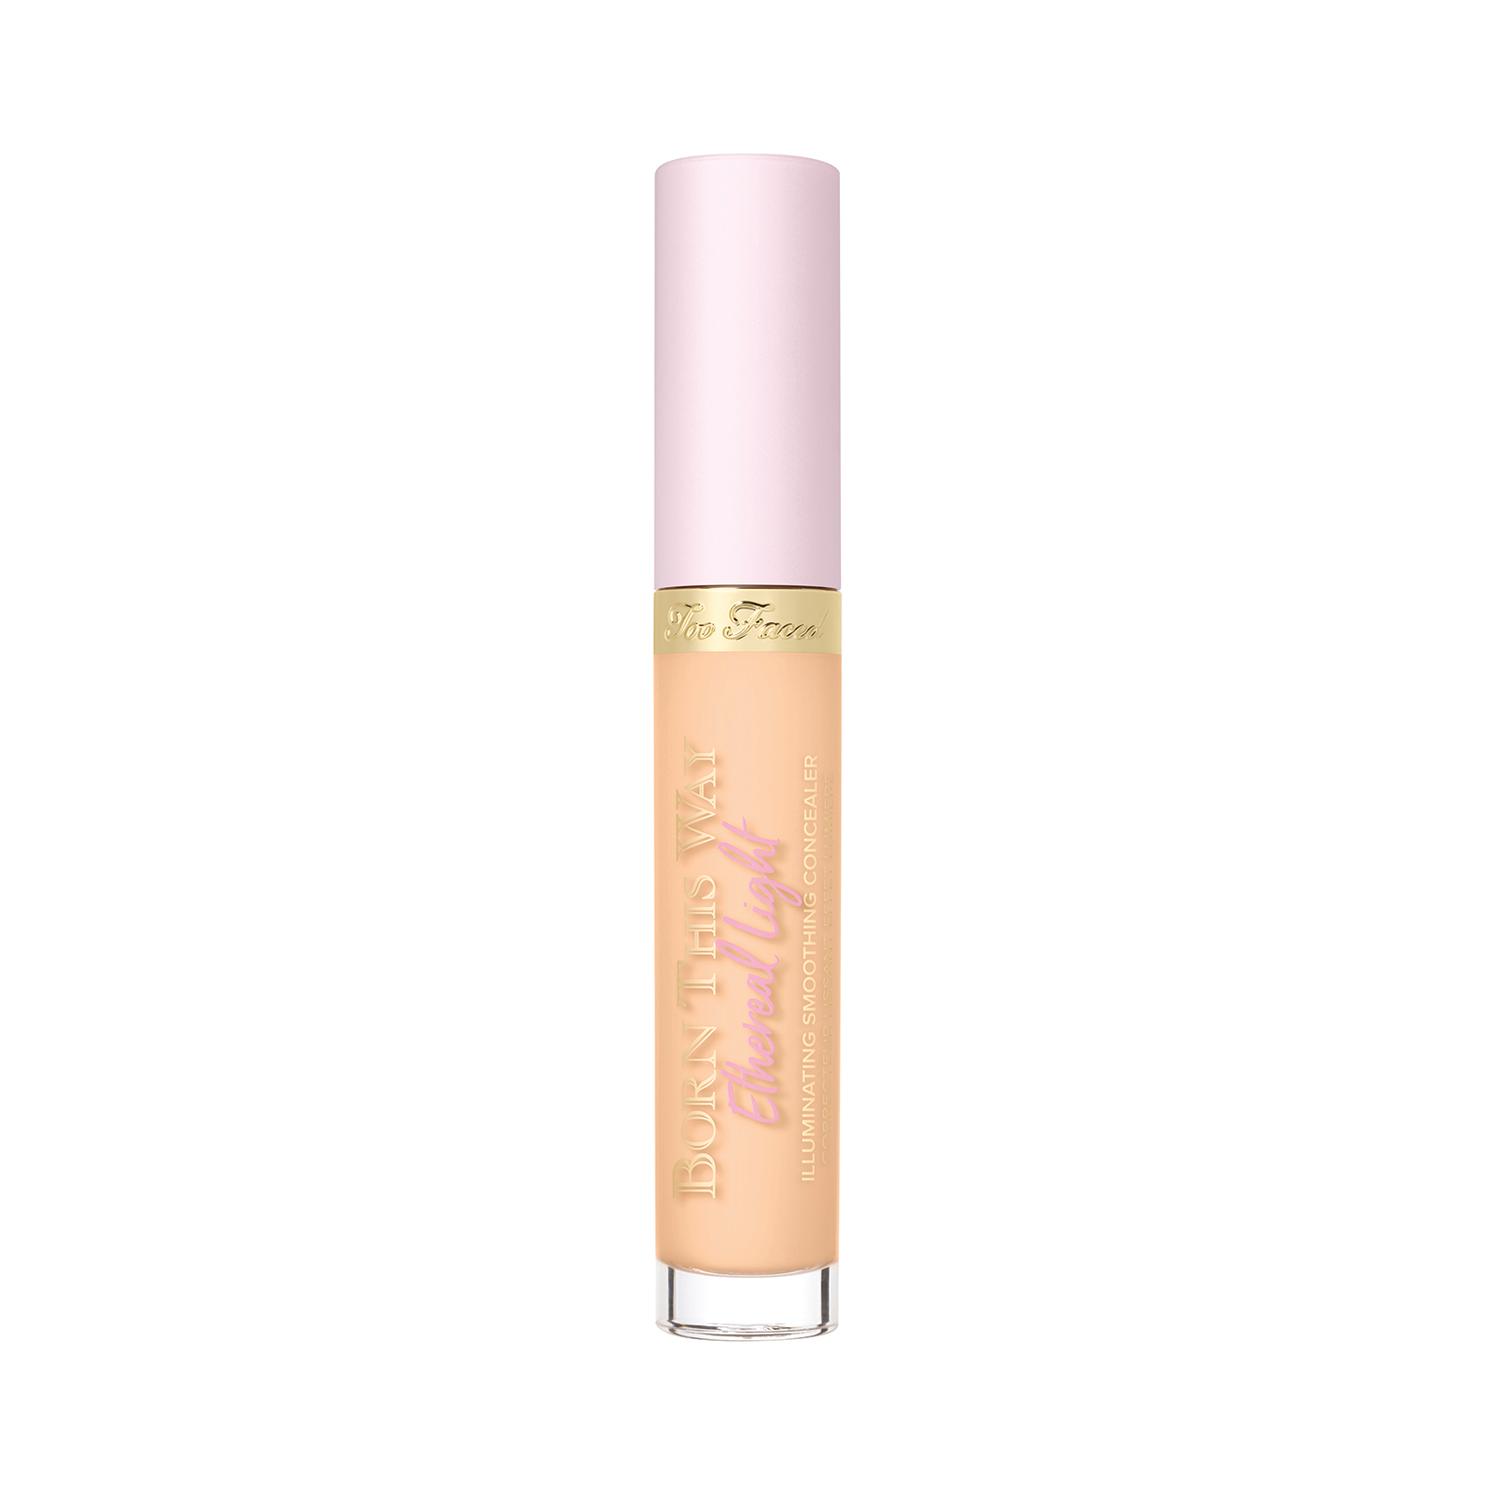 Too Faced | Too Faced Born This Way Illuminating Concealer - Butter Croissant (5ml)